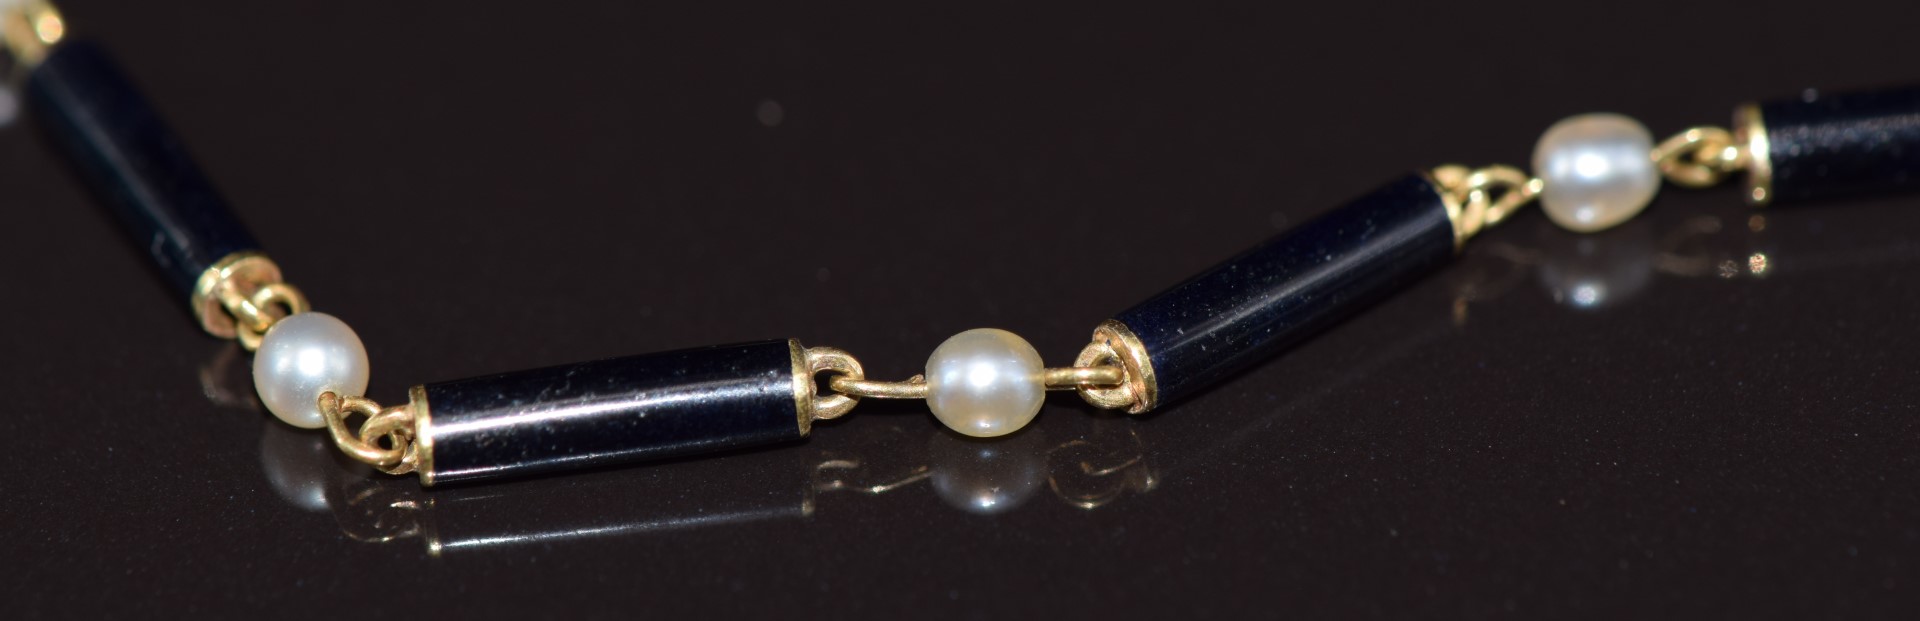 Victorian 9ct gold chain made up of alternating natural pearls and black enamel barrel links, 9. - Image 3 of 5